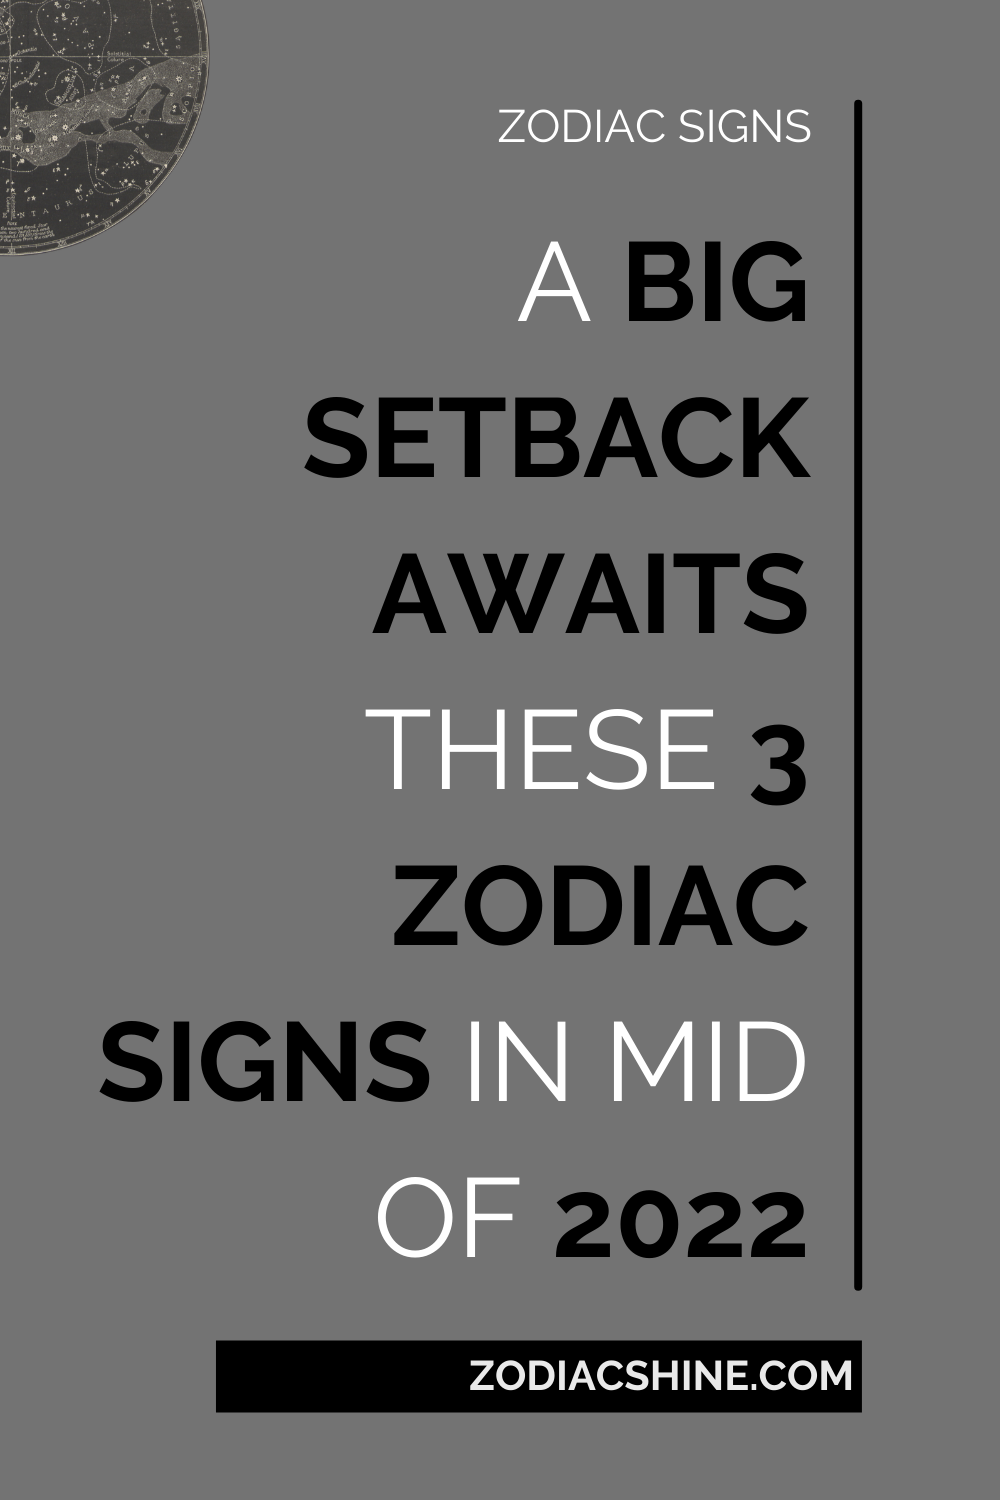 A Big Setback Awaits These 3 Zodiac Signs In Mid Of 2022